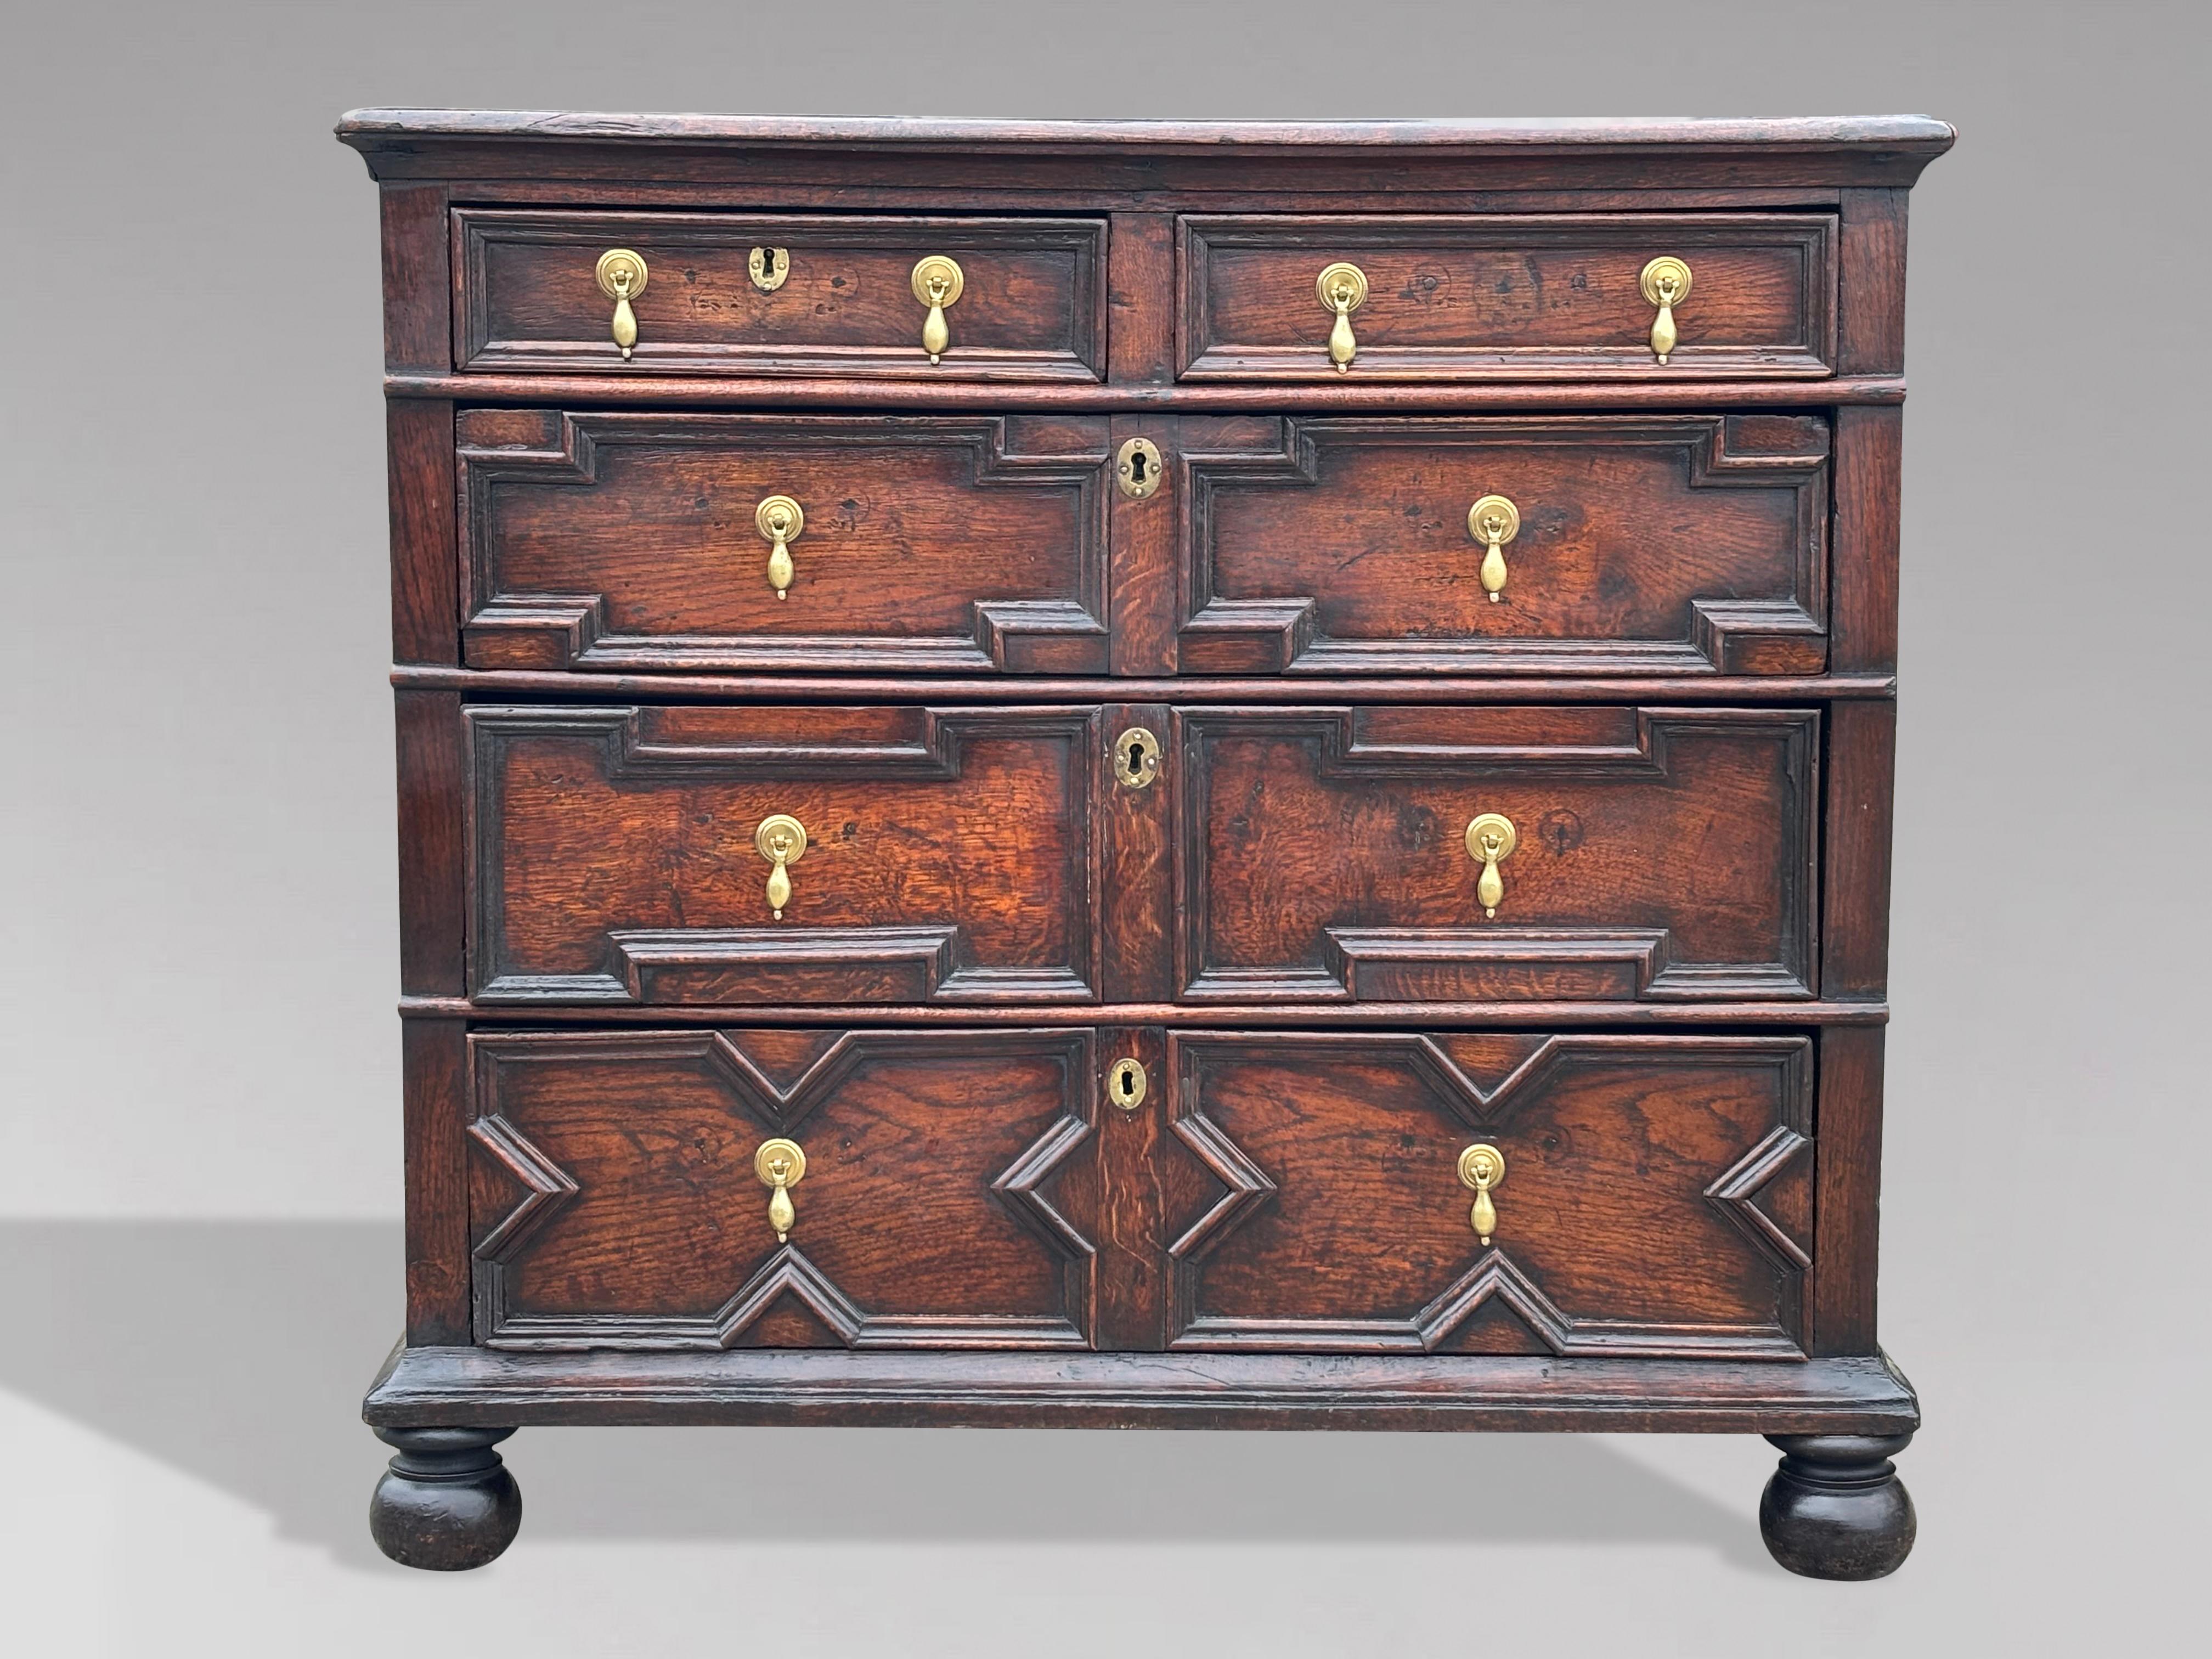 British 17th Century Charles II Period Jacobean Geometric Chest of Drawers For Sale